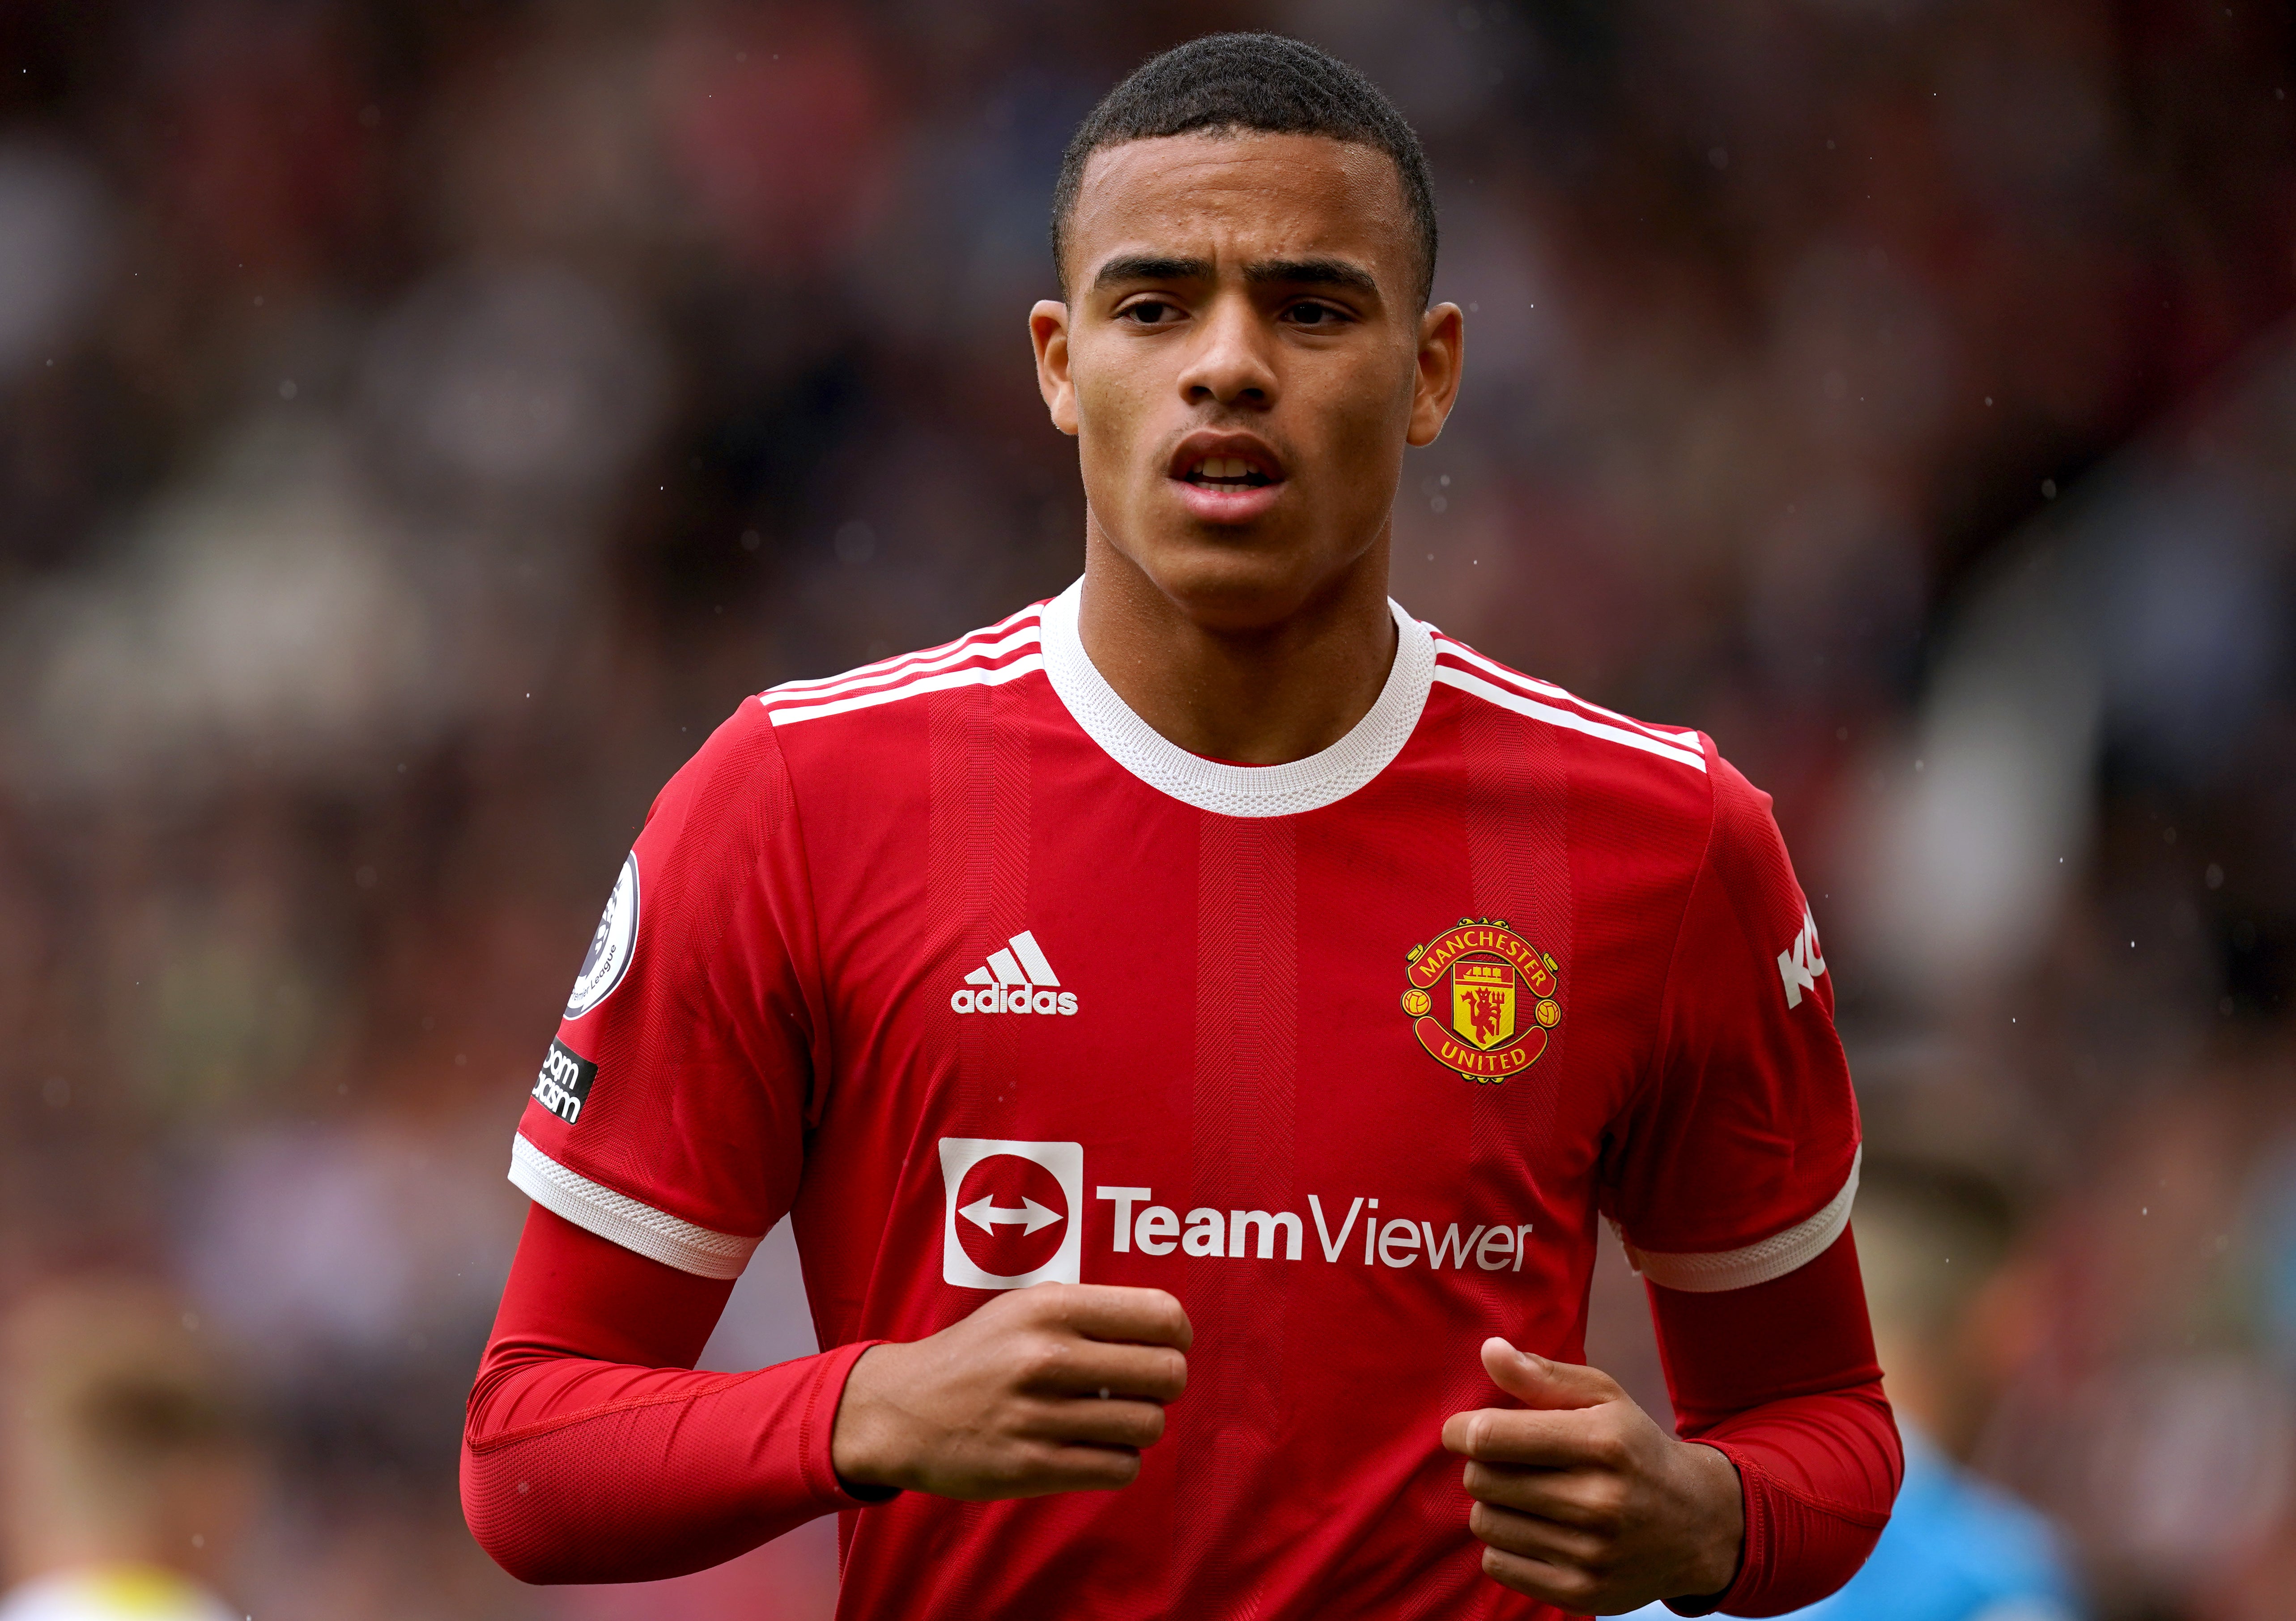 Manchester United striker Mason Greenwood was surprisingly left out of England’s squad for the upcoming World Cup qualifiers.